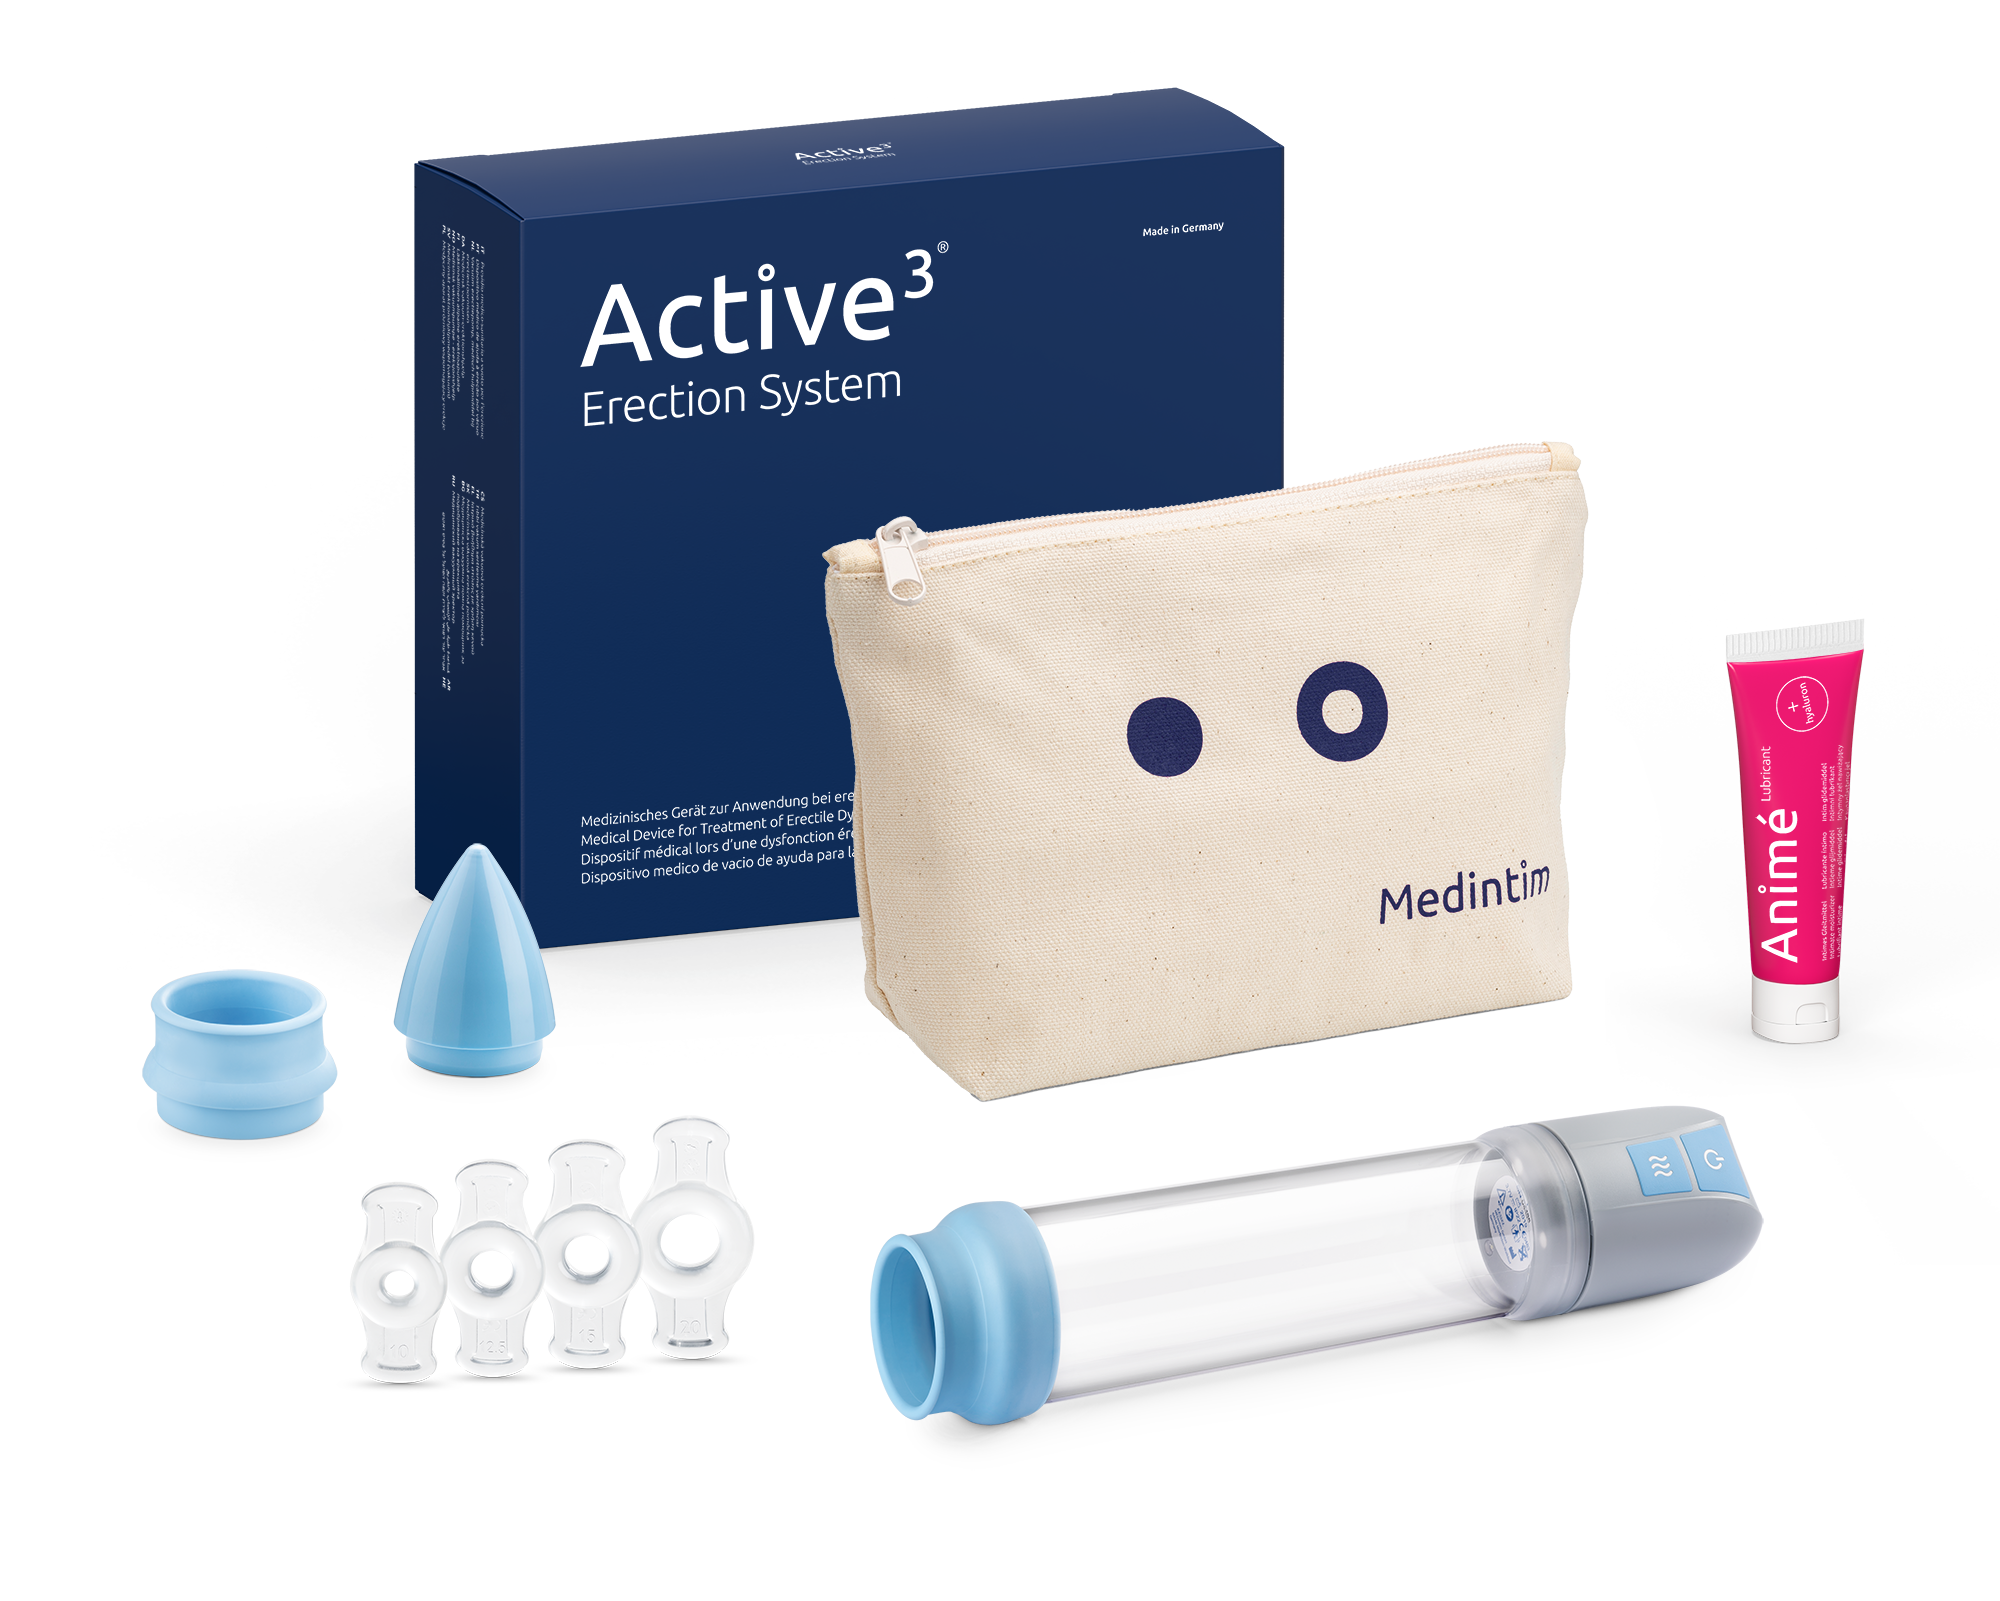 Active 3® Erection System